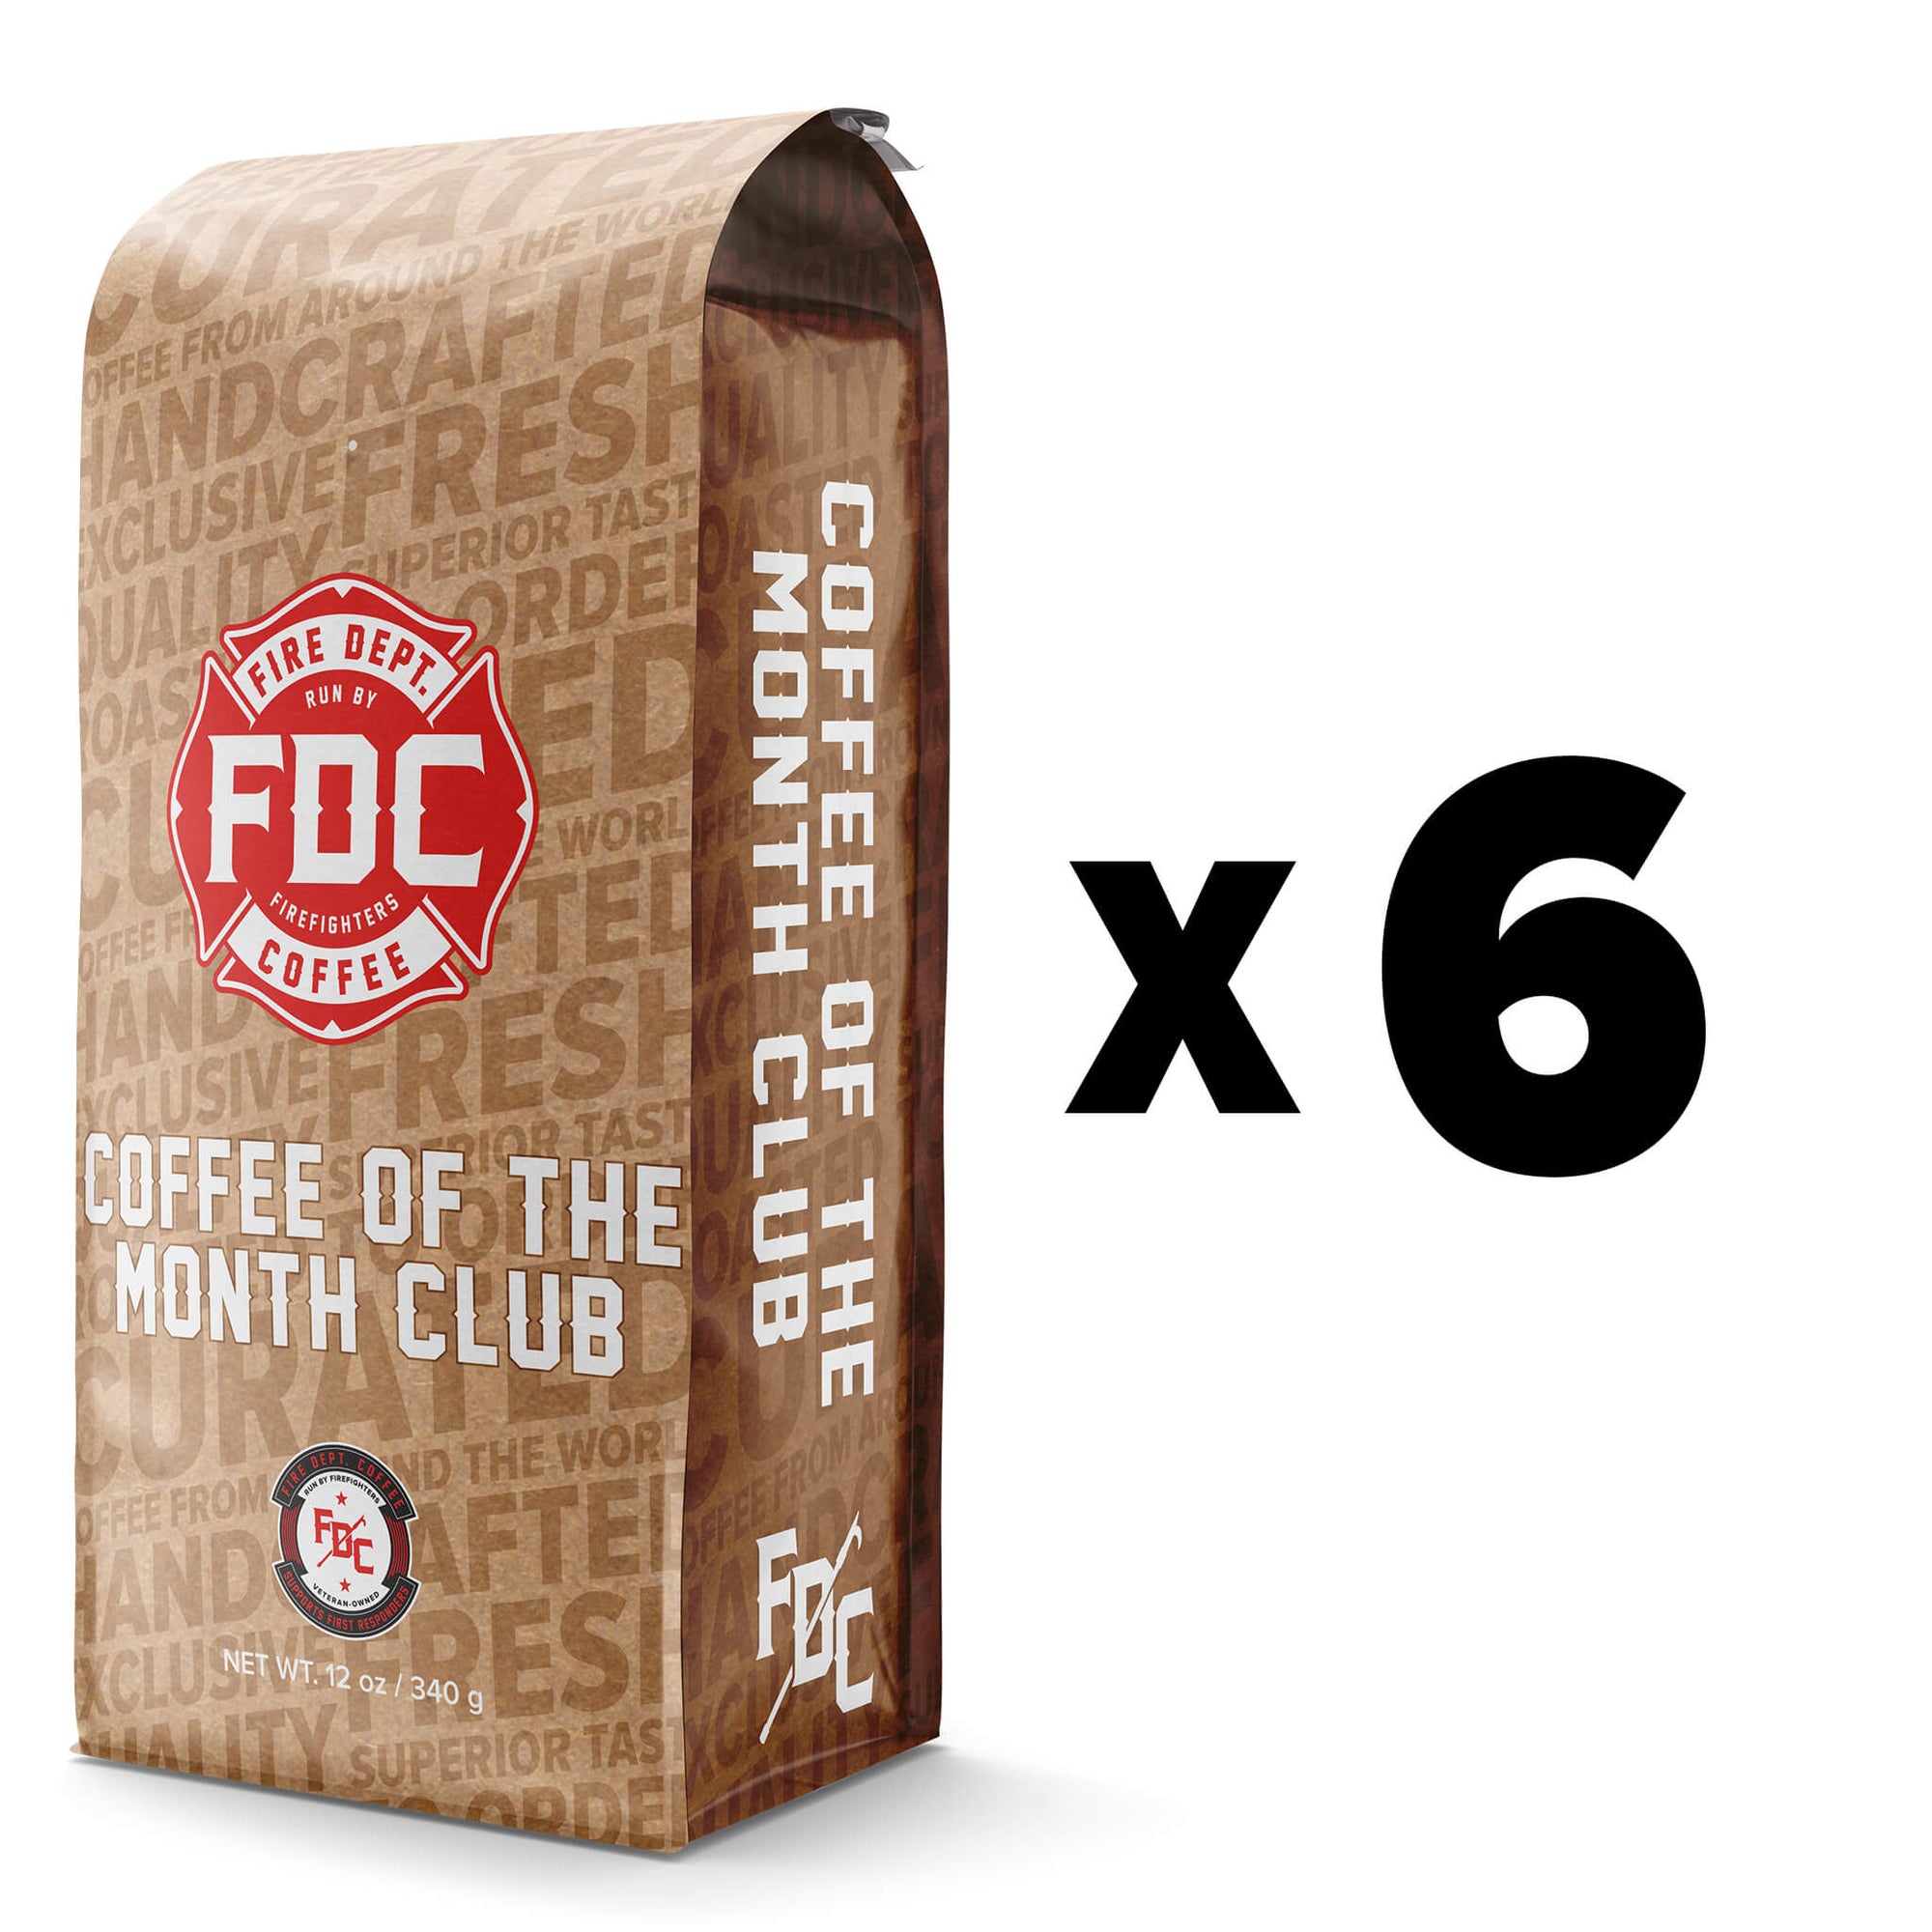 COFFEE OF THE MONTH CLUB GROUND - 6 MONTH PREPAID SUBSCRIPTION